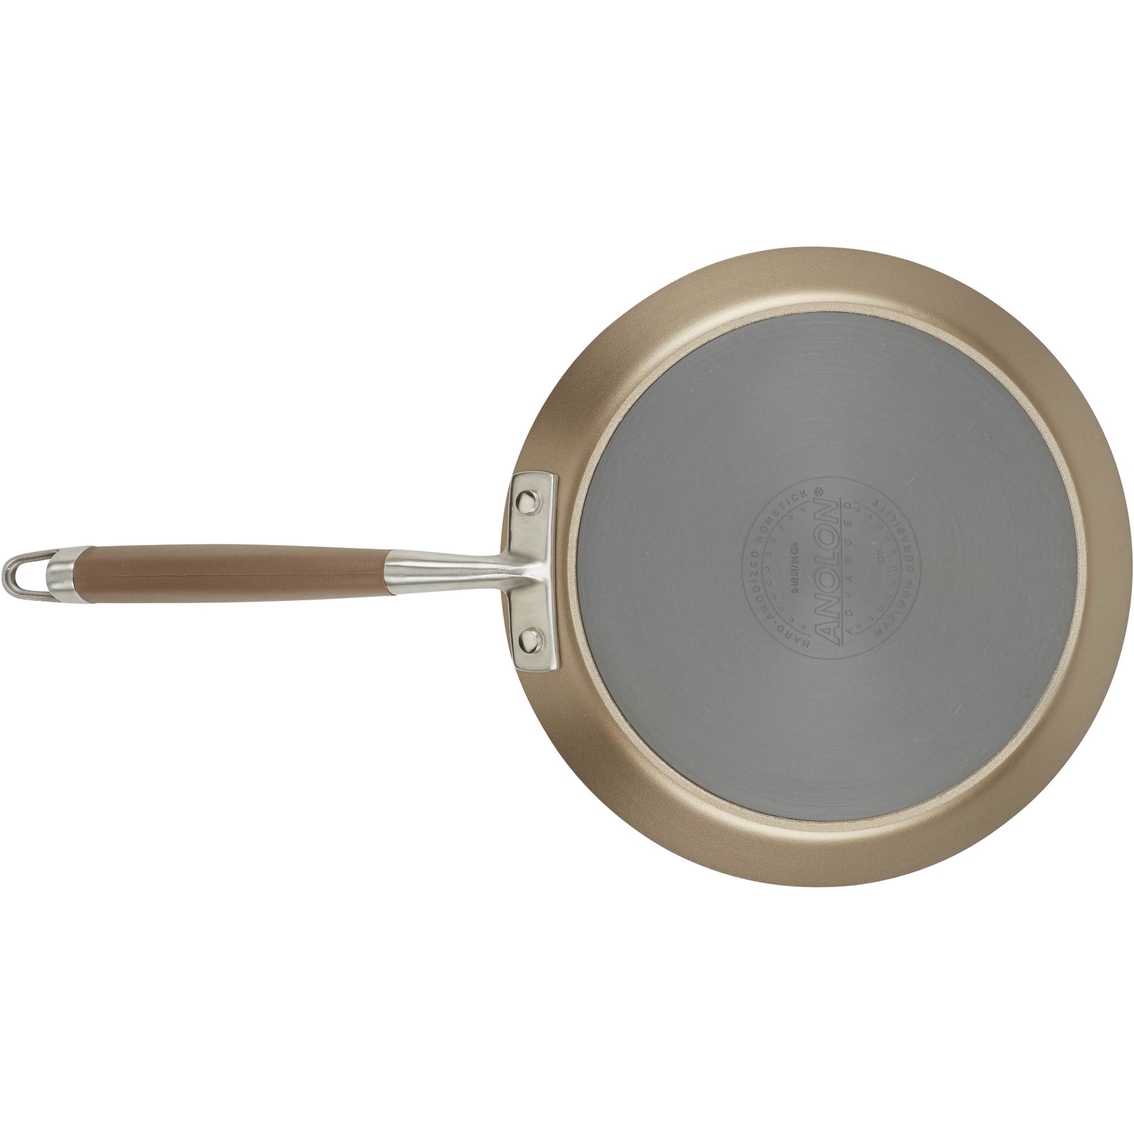 Anolon Advanced Home 9.5 in. Hard Anodized Nonstick Crepe Pan - Image 2 of 3